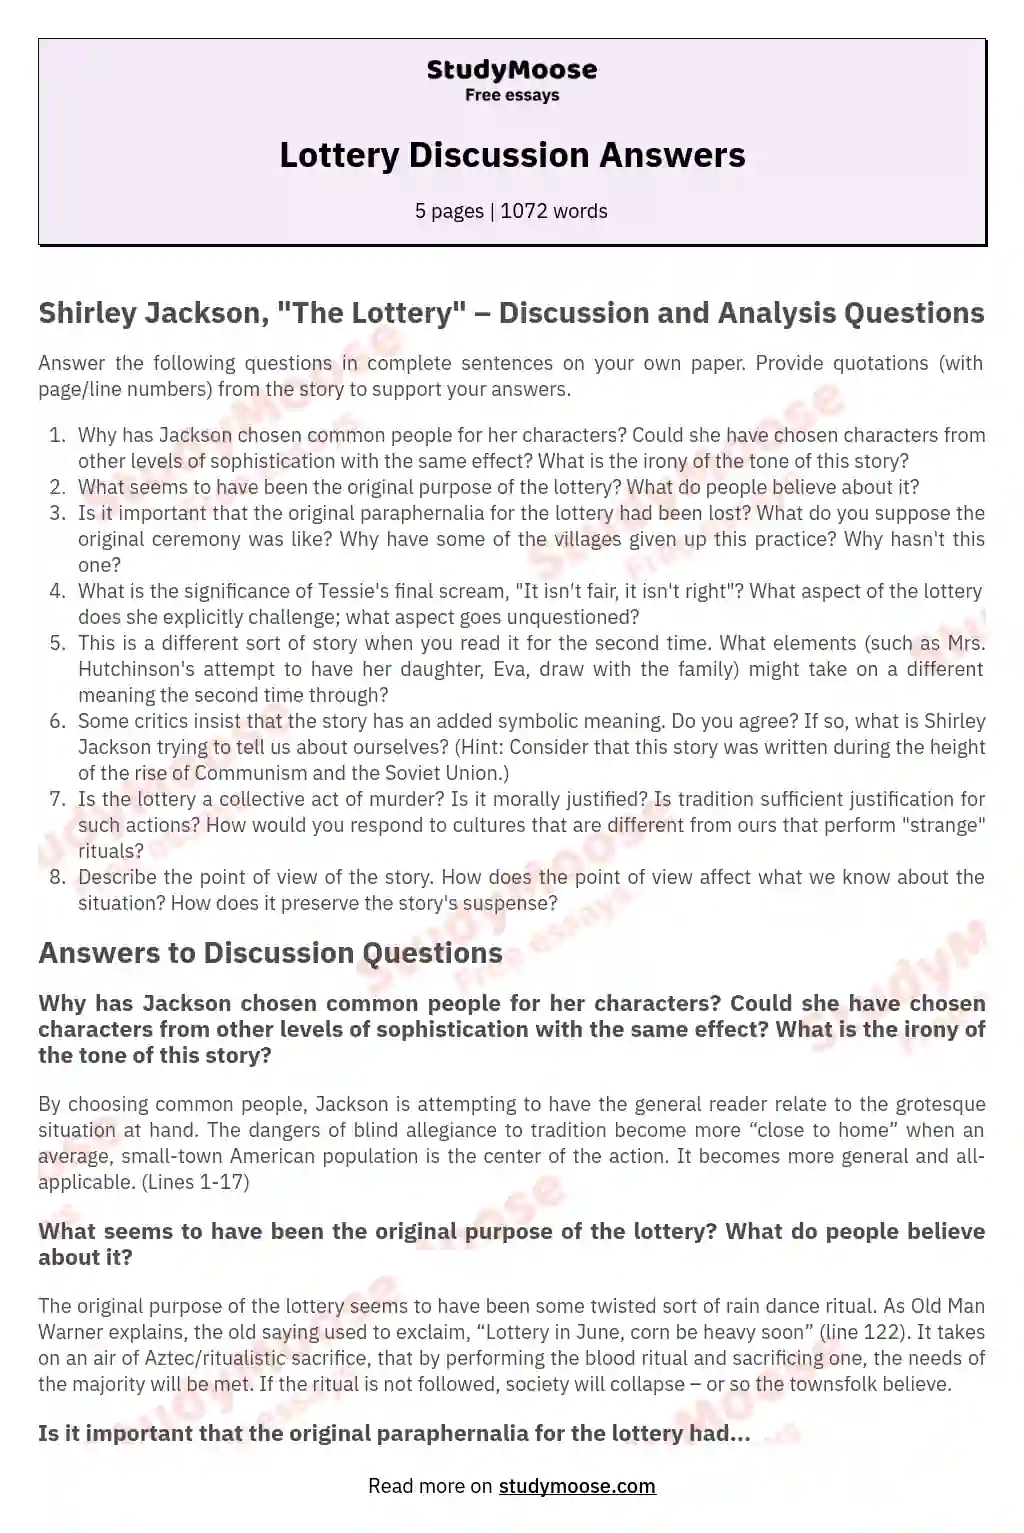 Lottery Discussion Answers essay